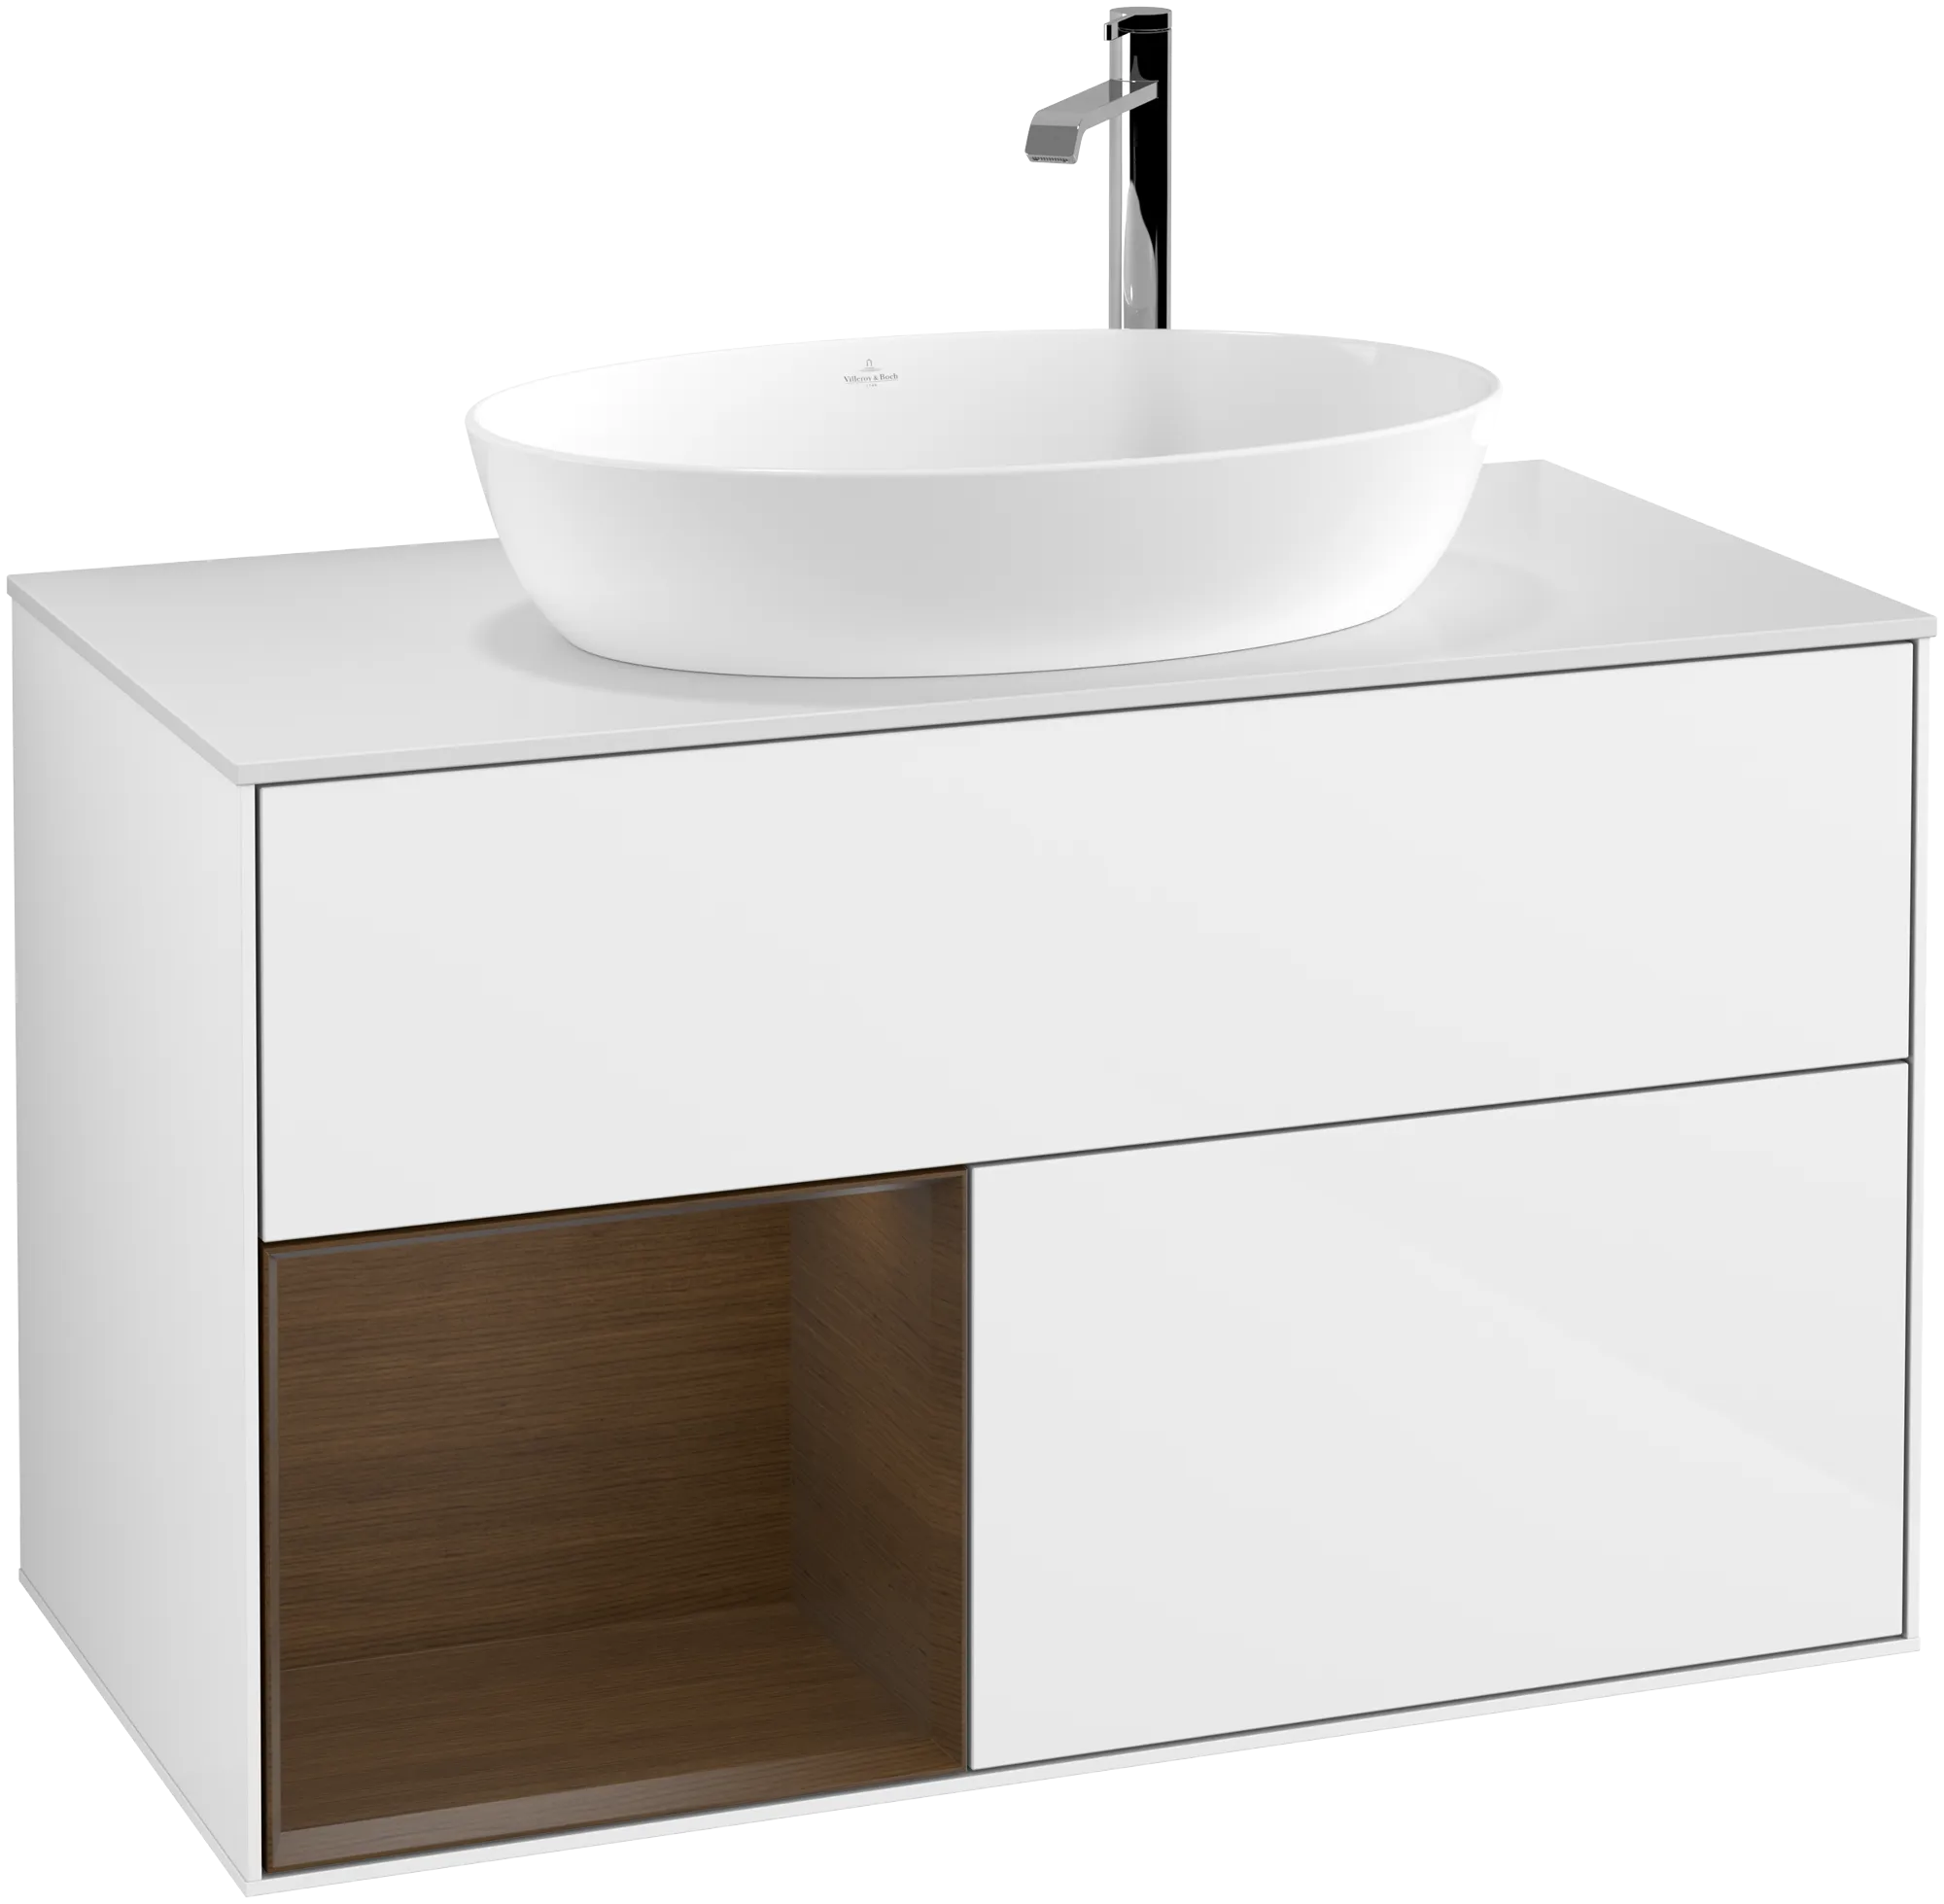 Obrázek VILLEROY BOCH Finion Vanity unit, with lighting, 2 pull-out compartments, 1000 x 603 x 501 mm, Glossy White Lacquer / Walnut Veneer / Glass White Matt #G891GNGF